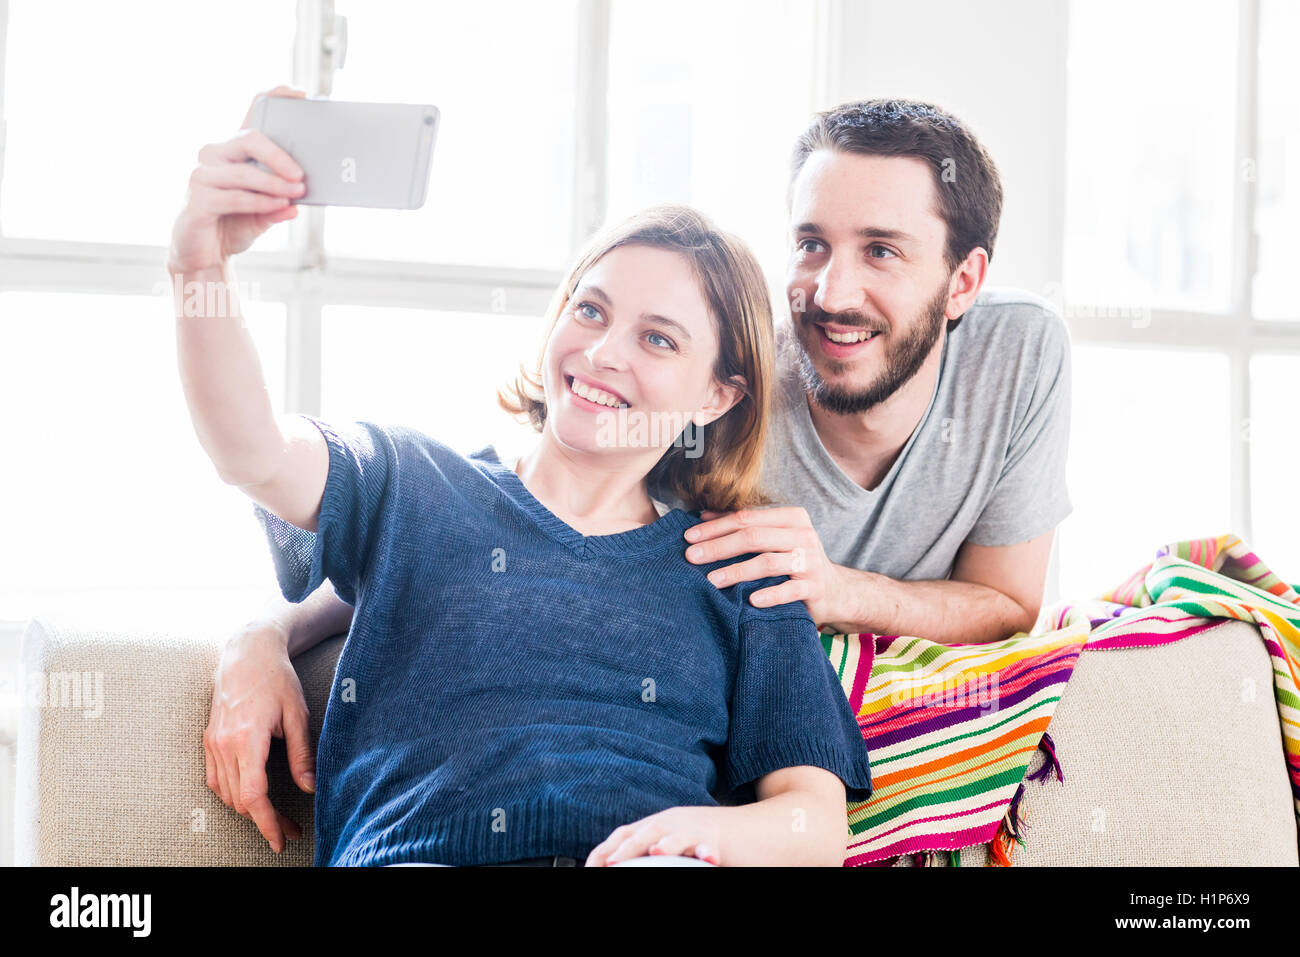 Couple taking picture with camera phone. Stock Photo